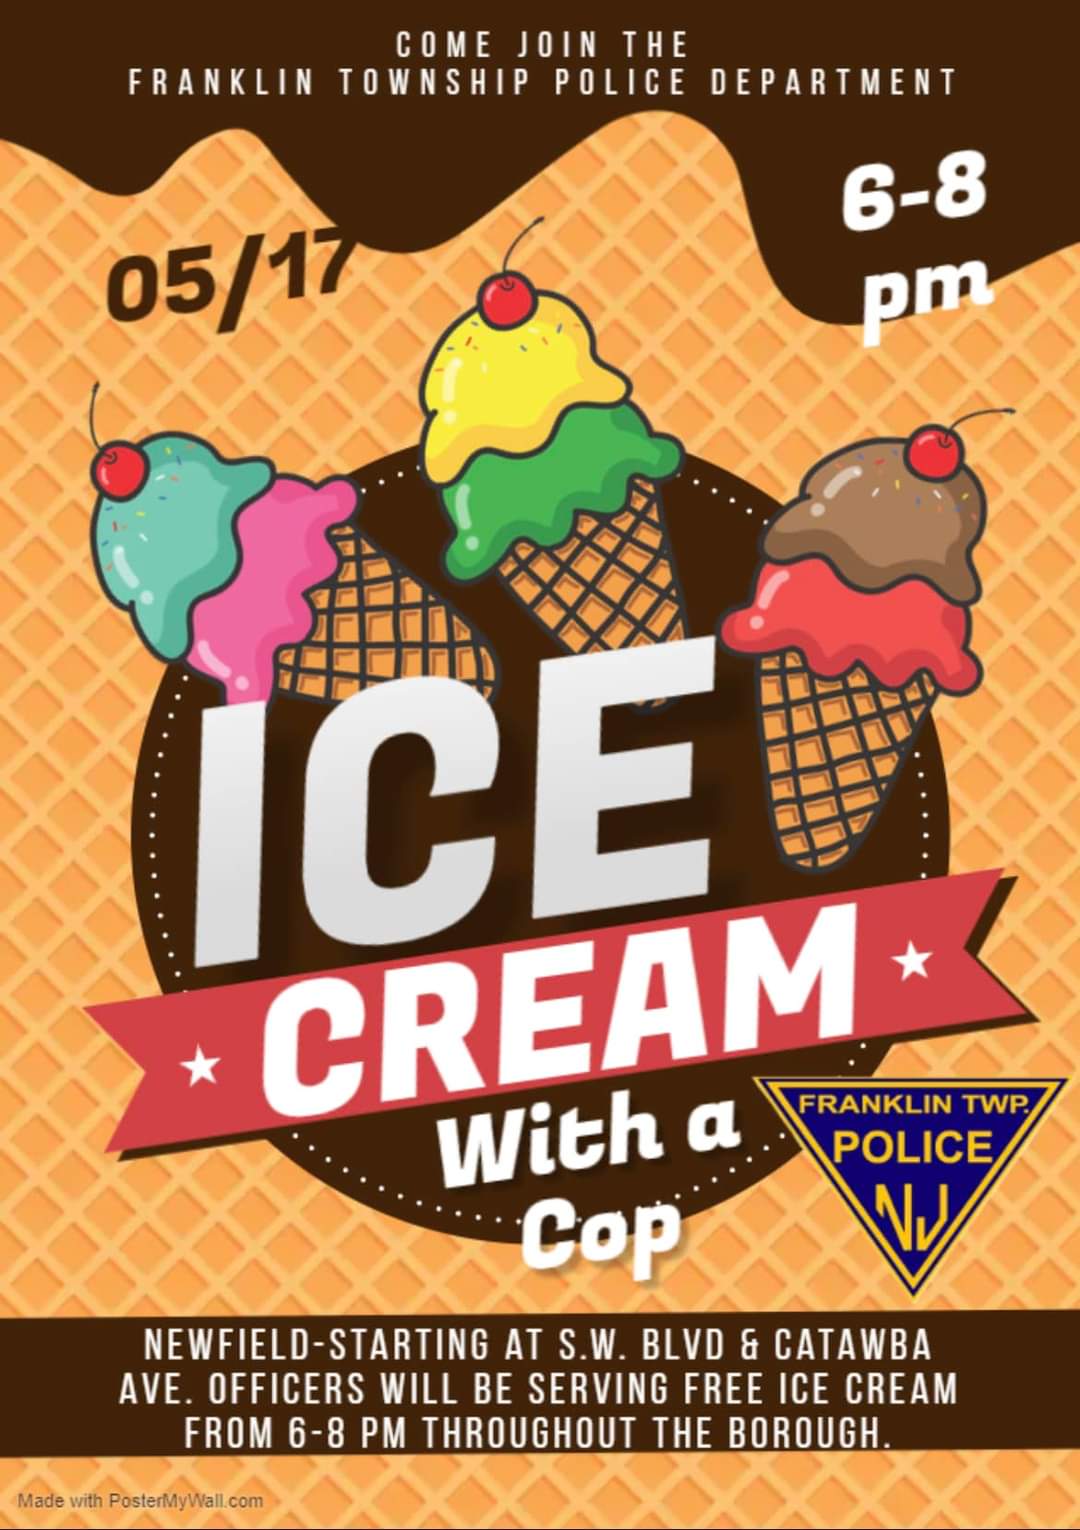 Ice cream with a cop